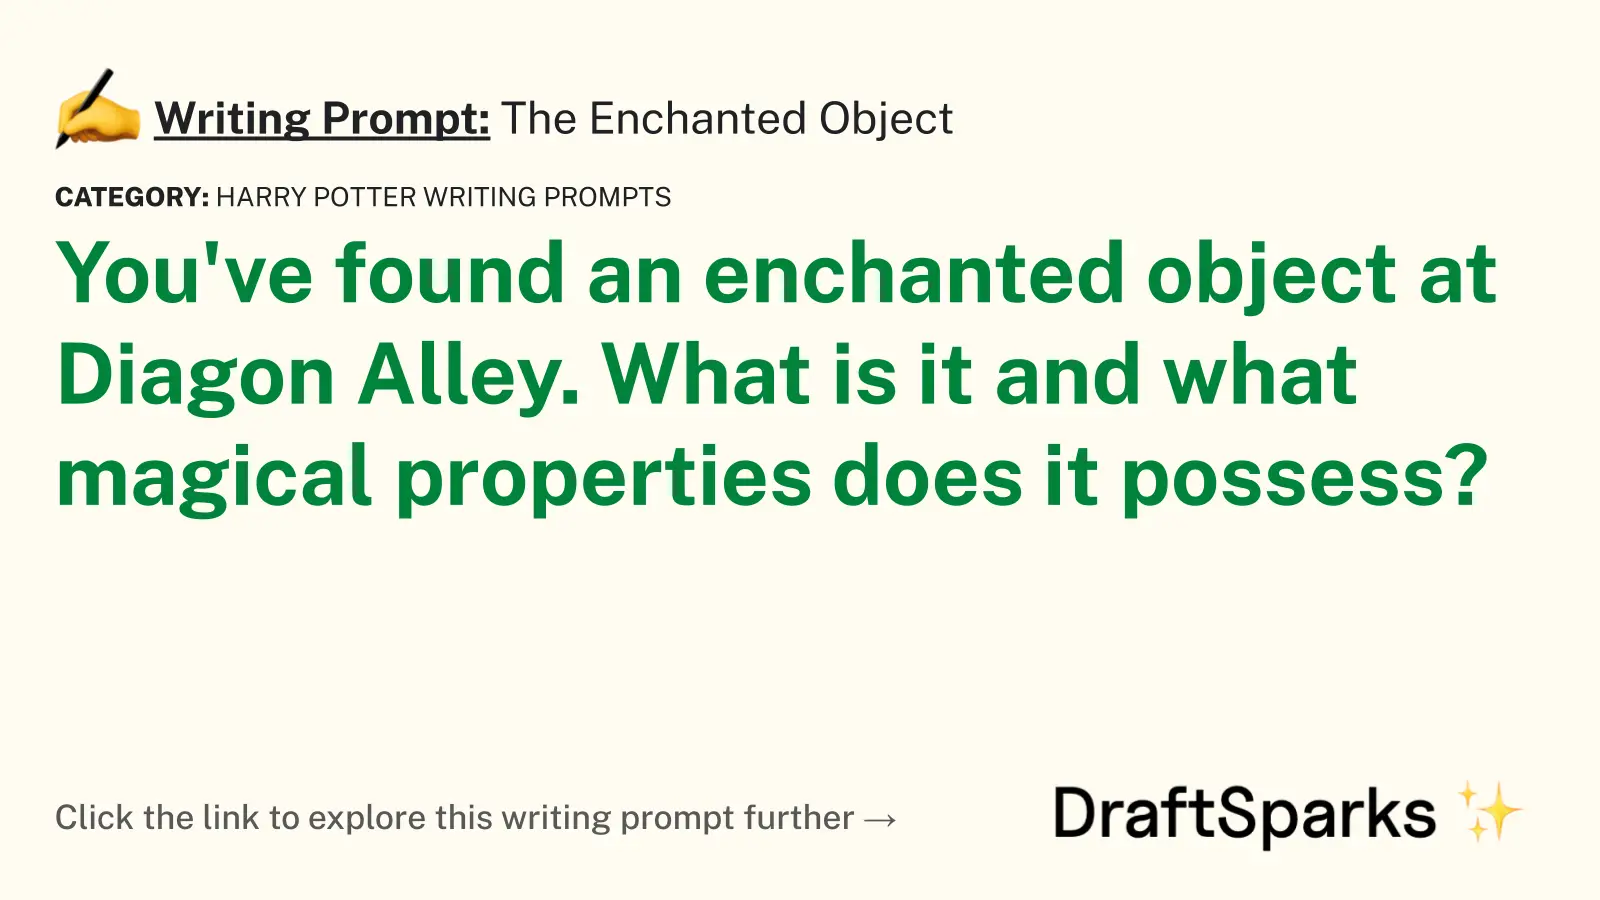 The Enchanted Object